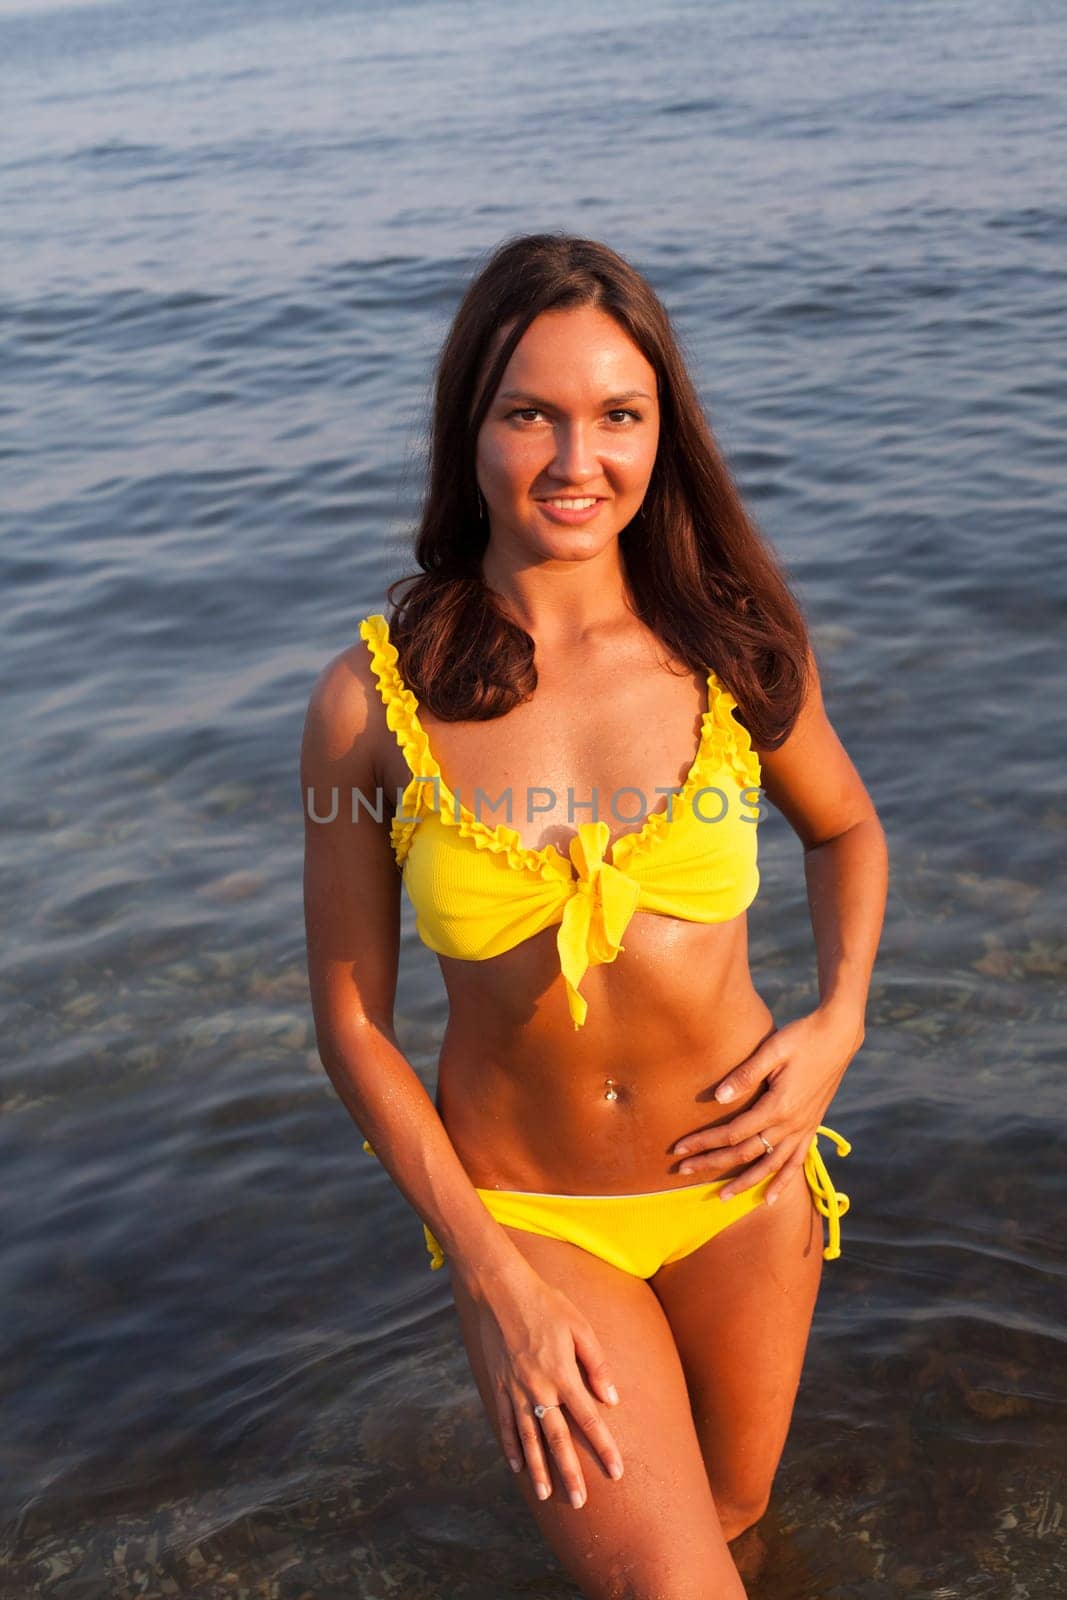 Beautiful woman with long hair in a yellow swimsuit walks on the beach by the sea by Simakov